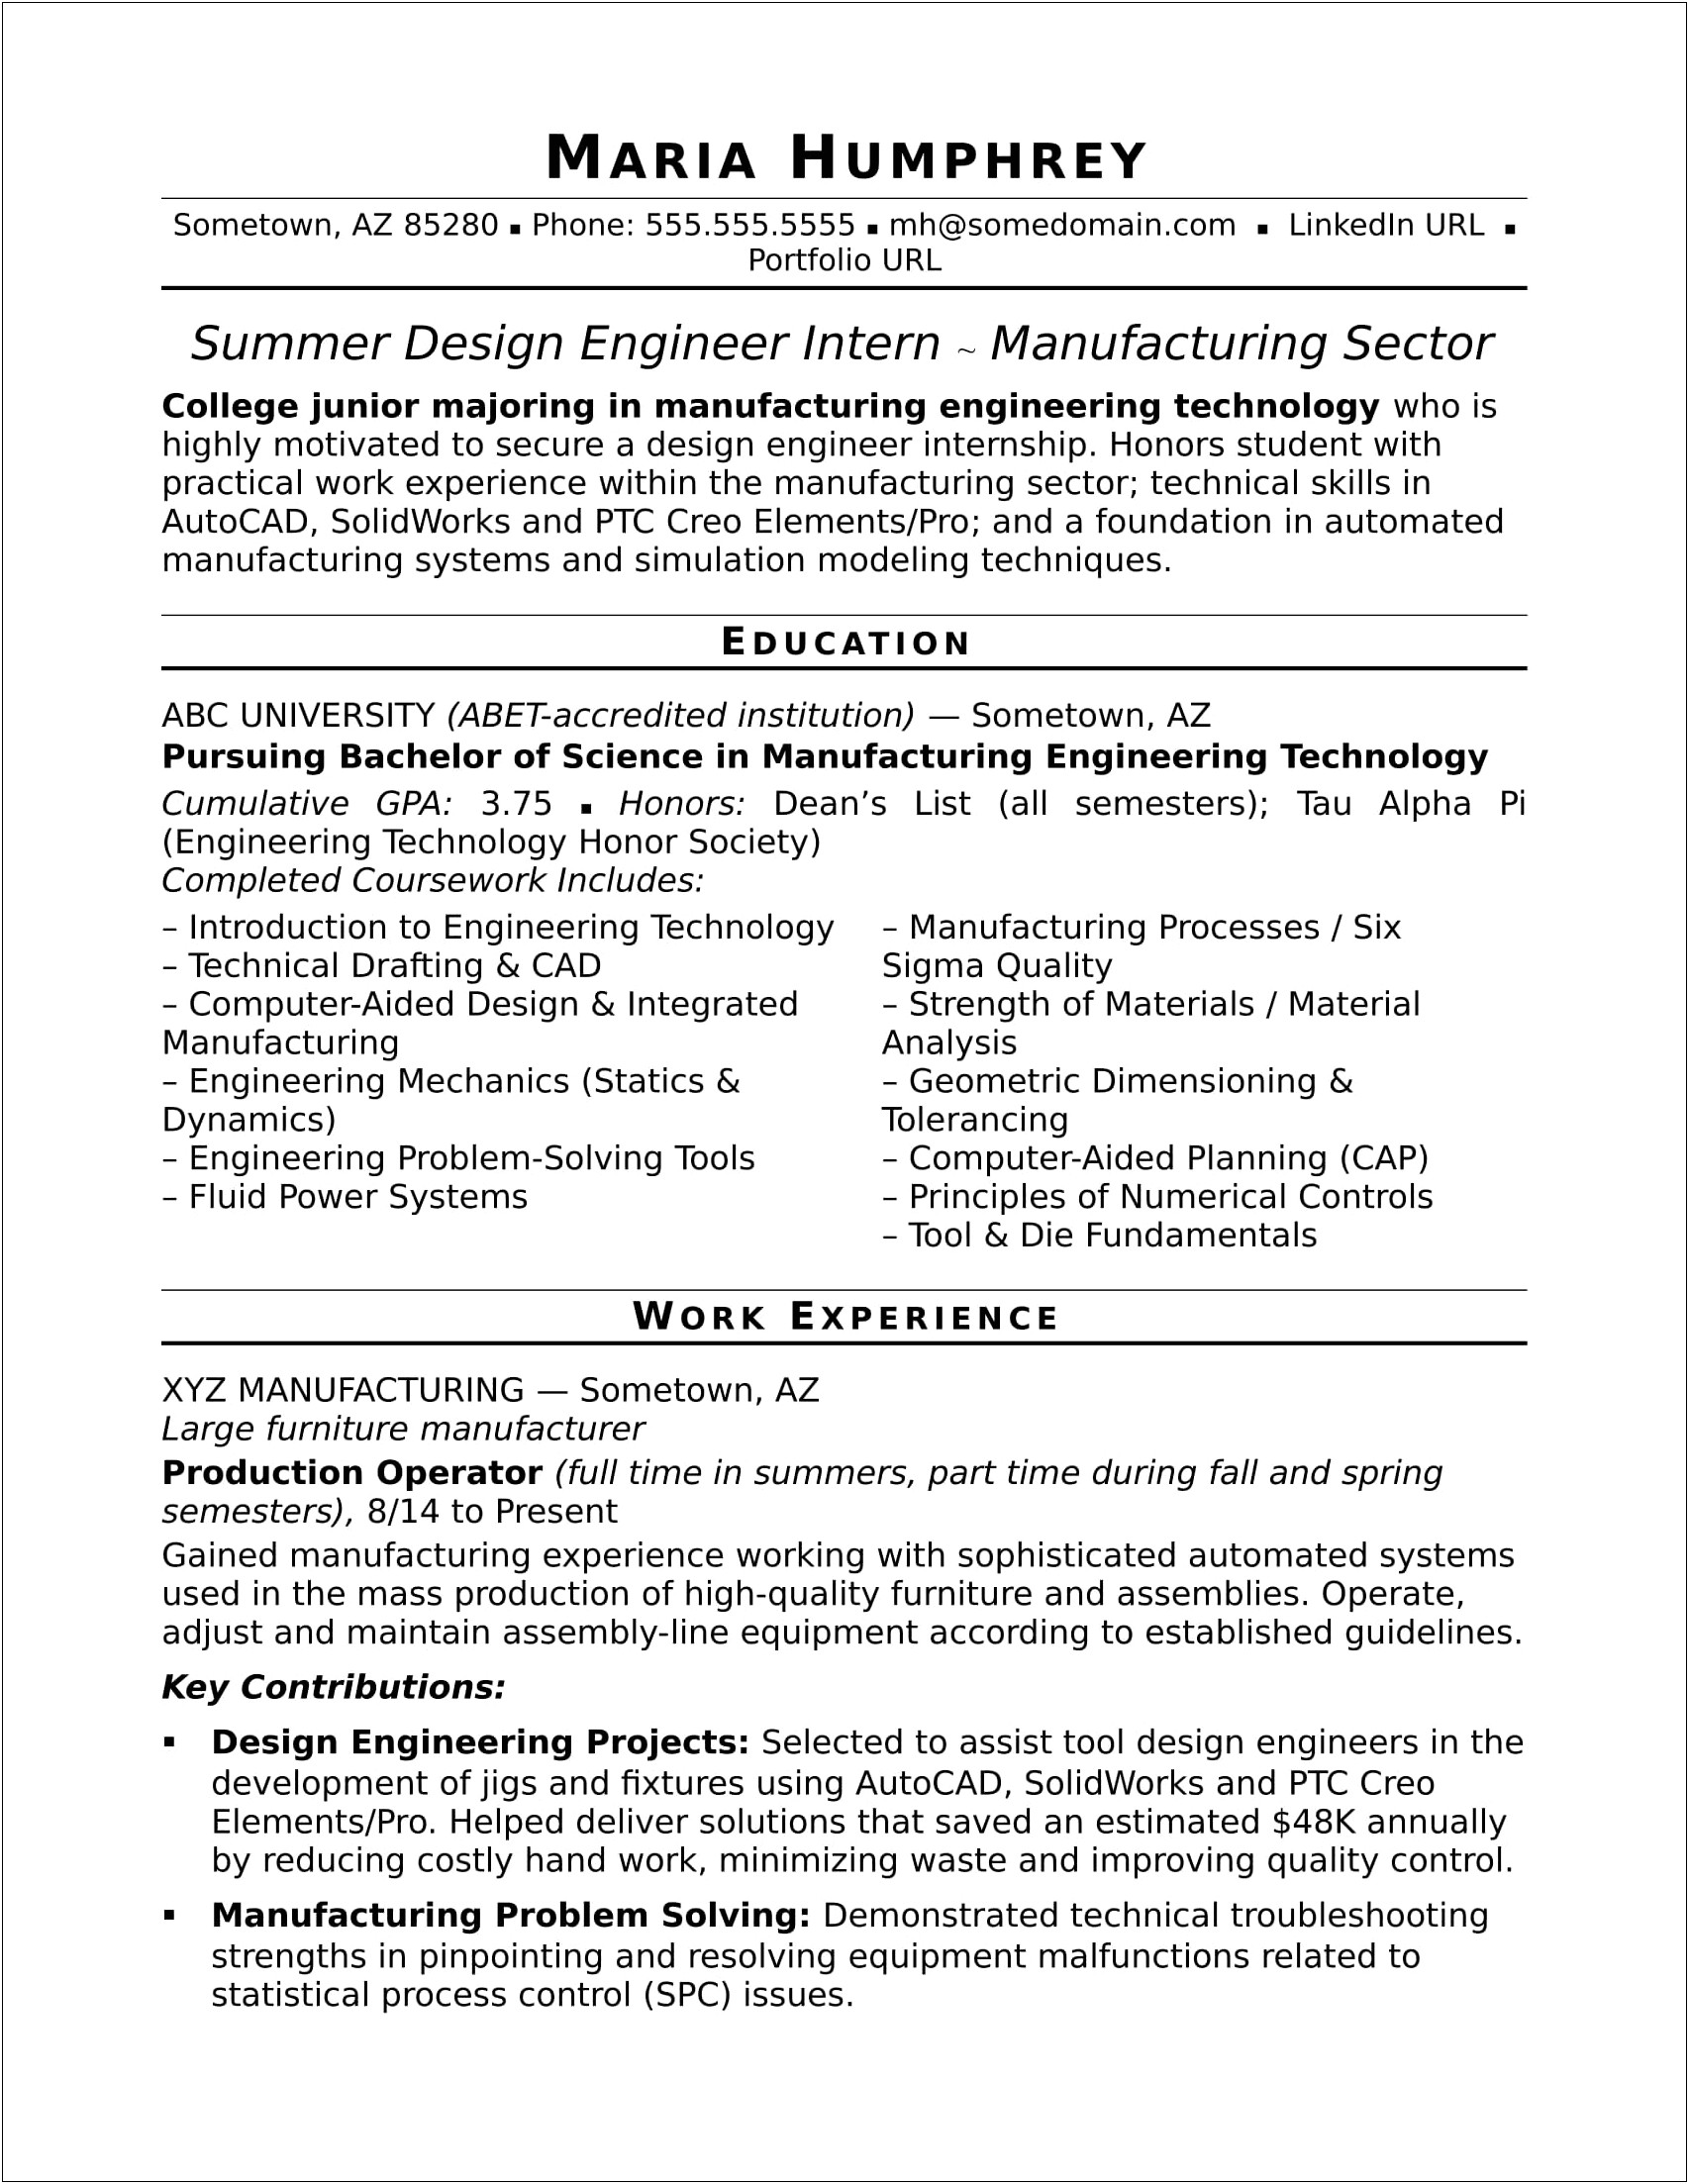 Resume Objective For Entry Level Engineer